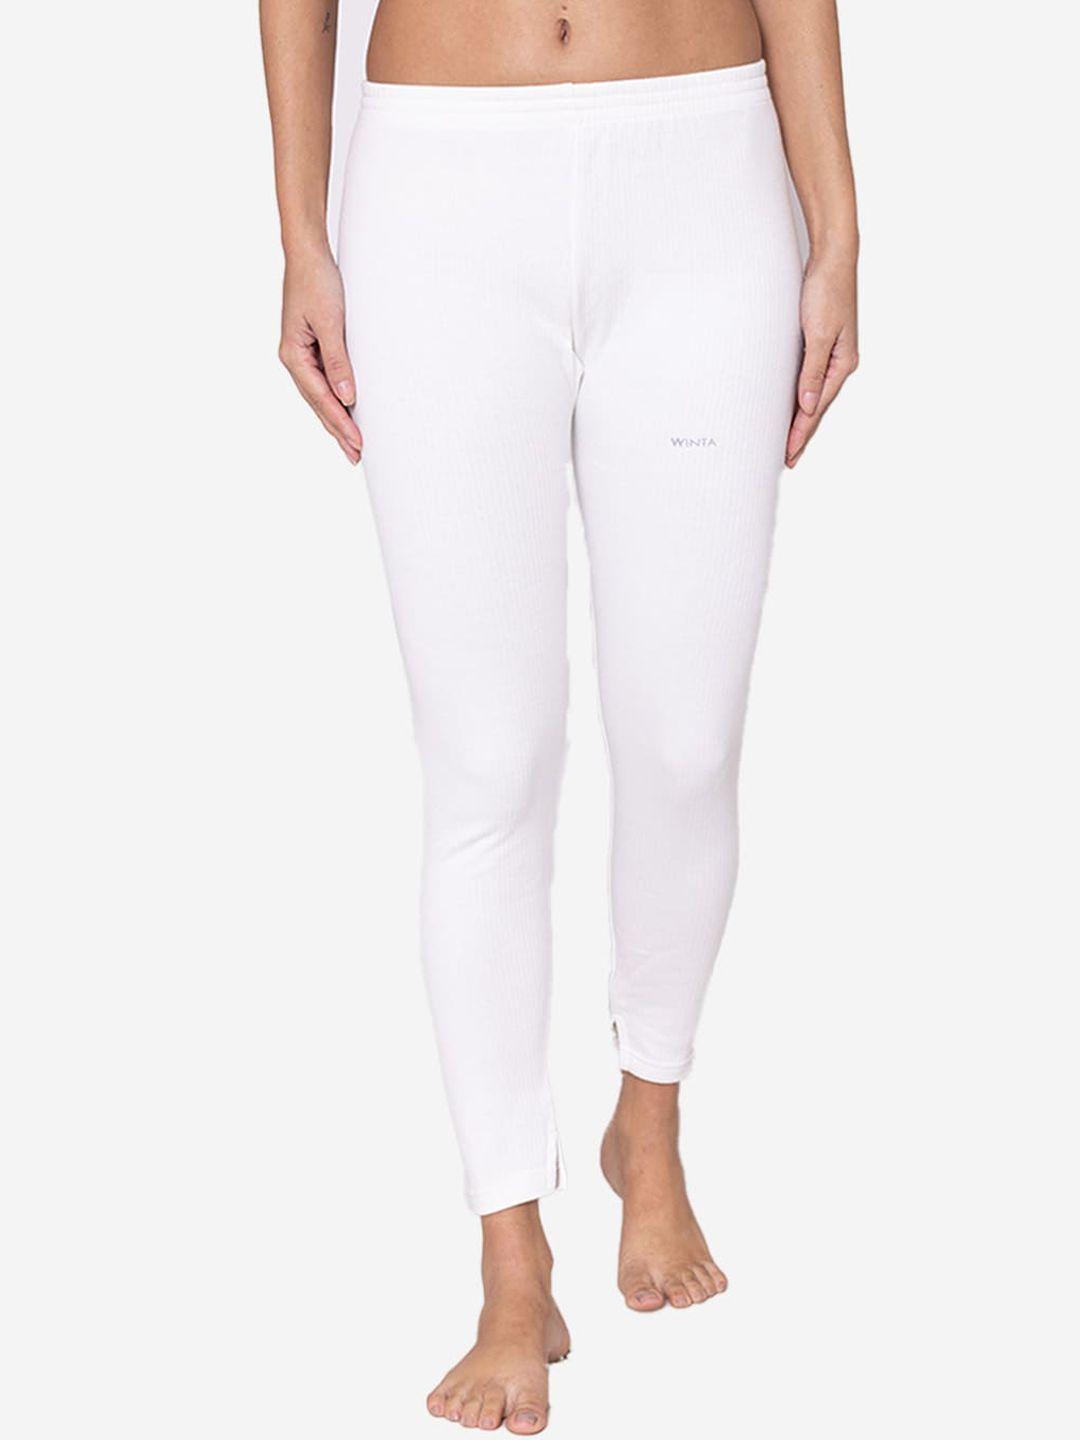 groversons paris beauty women white solid thermal bottoms